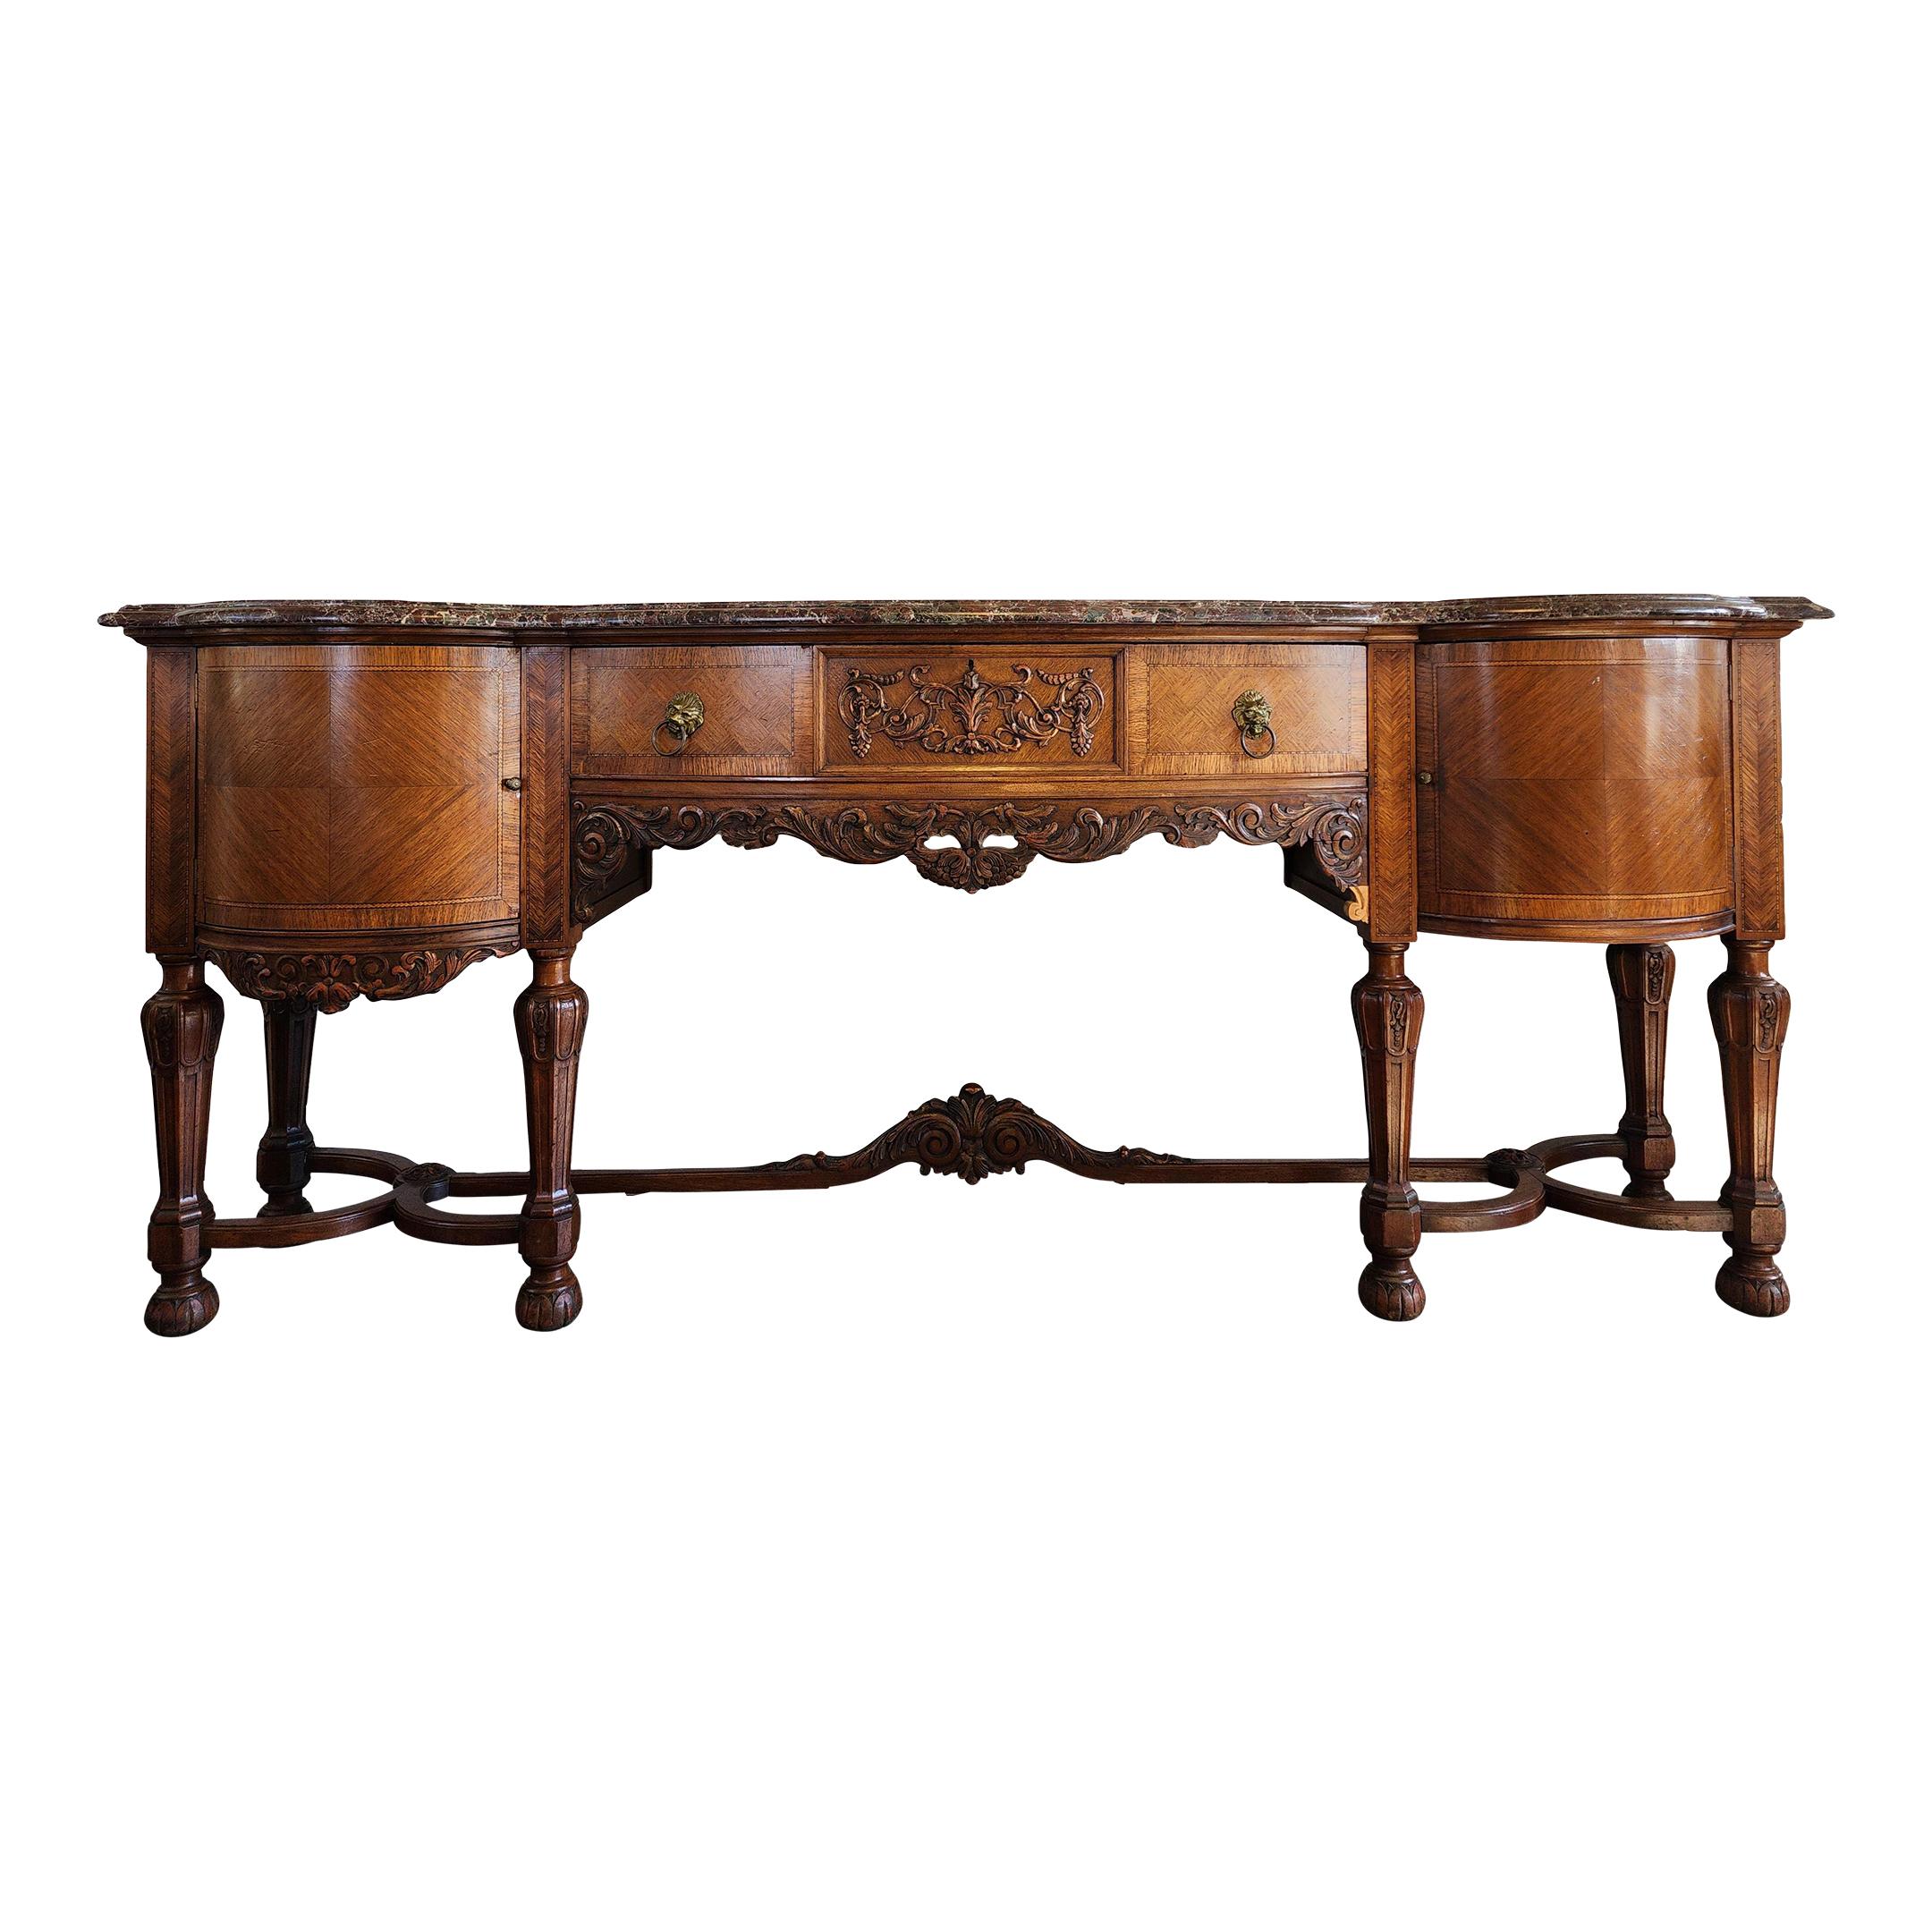 This masterpiece boasting with history, a curated furnishing from the early 20th century acquired from an estate on the north shore of Mill Neck, Long Island New York. A traditional authentic carved wooden motifs and turned wooden spindle legs,